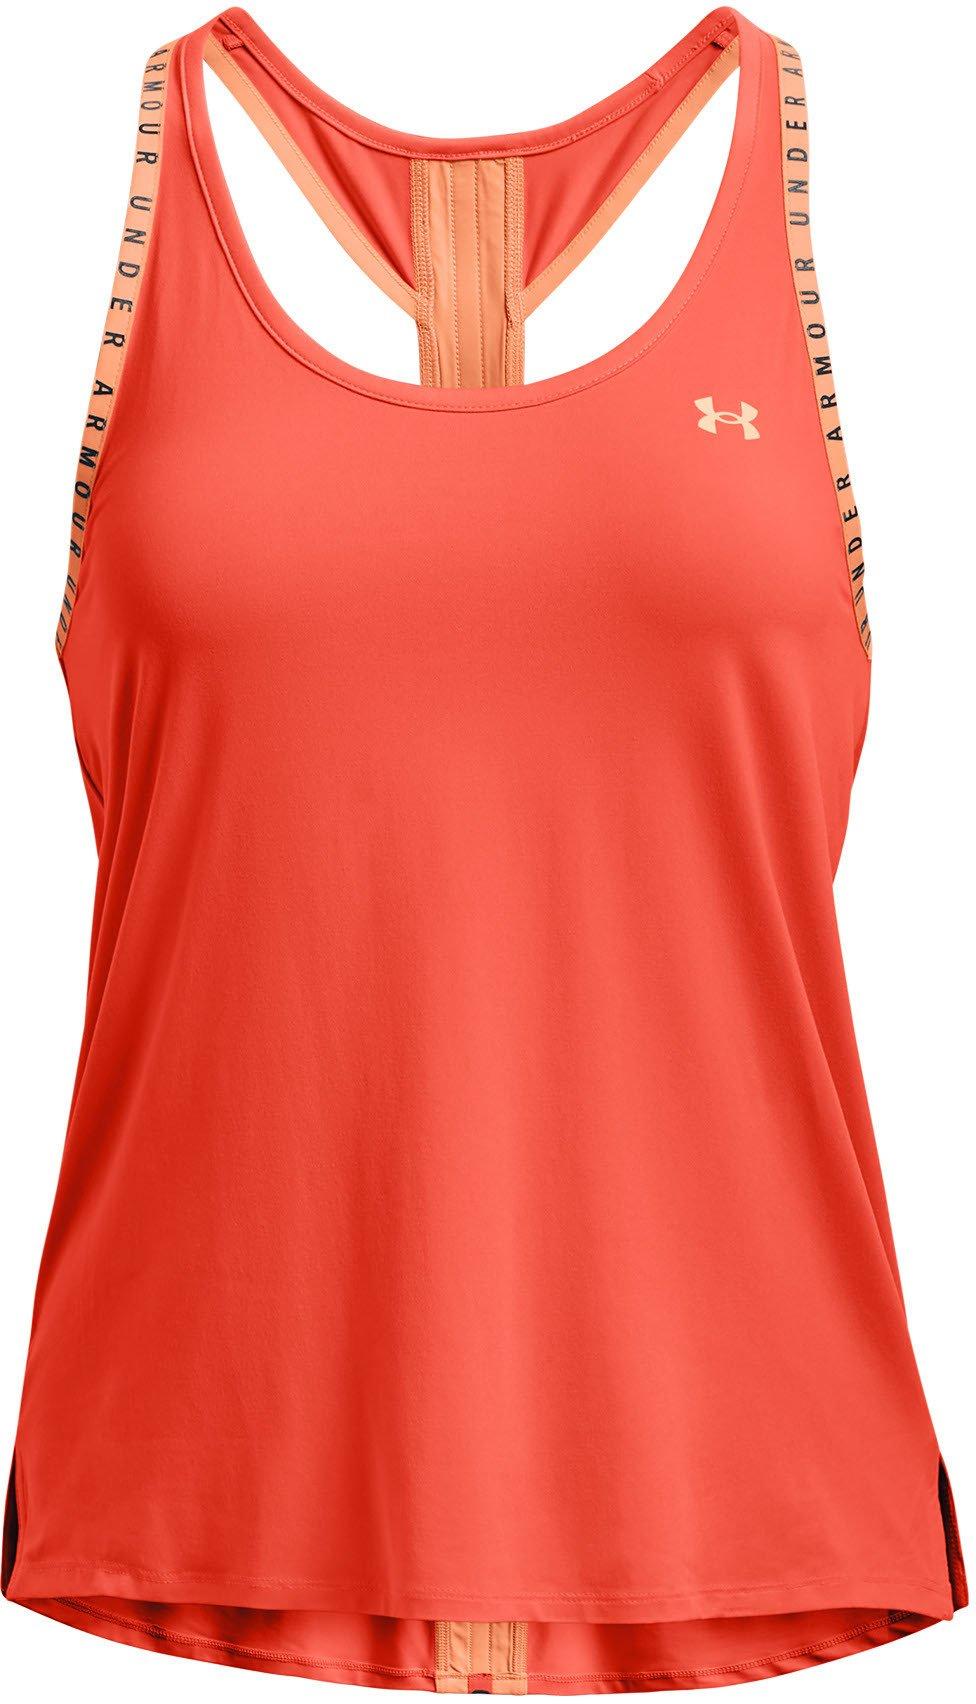 Under Armour Knockout Tank-ORG XS